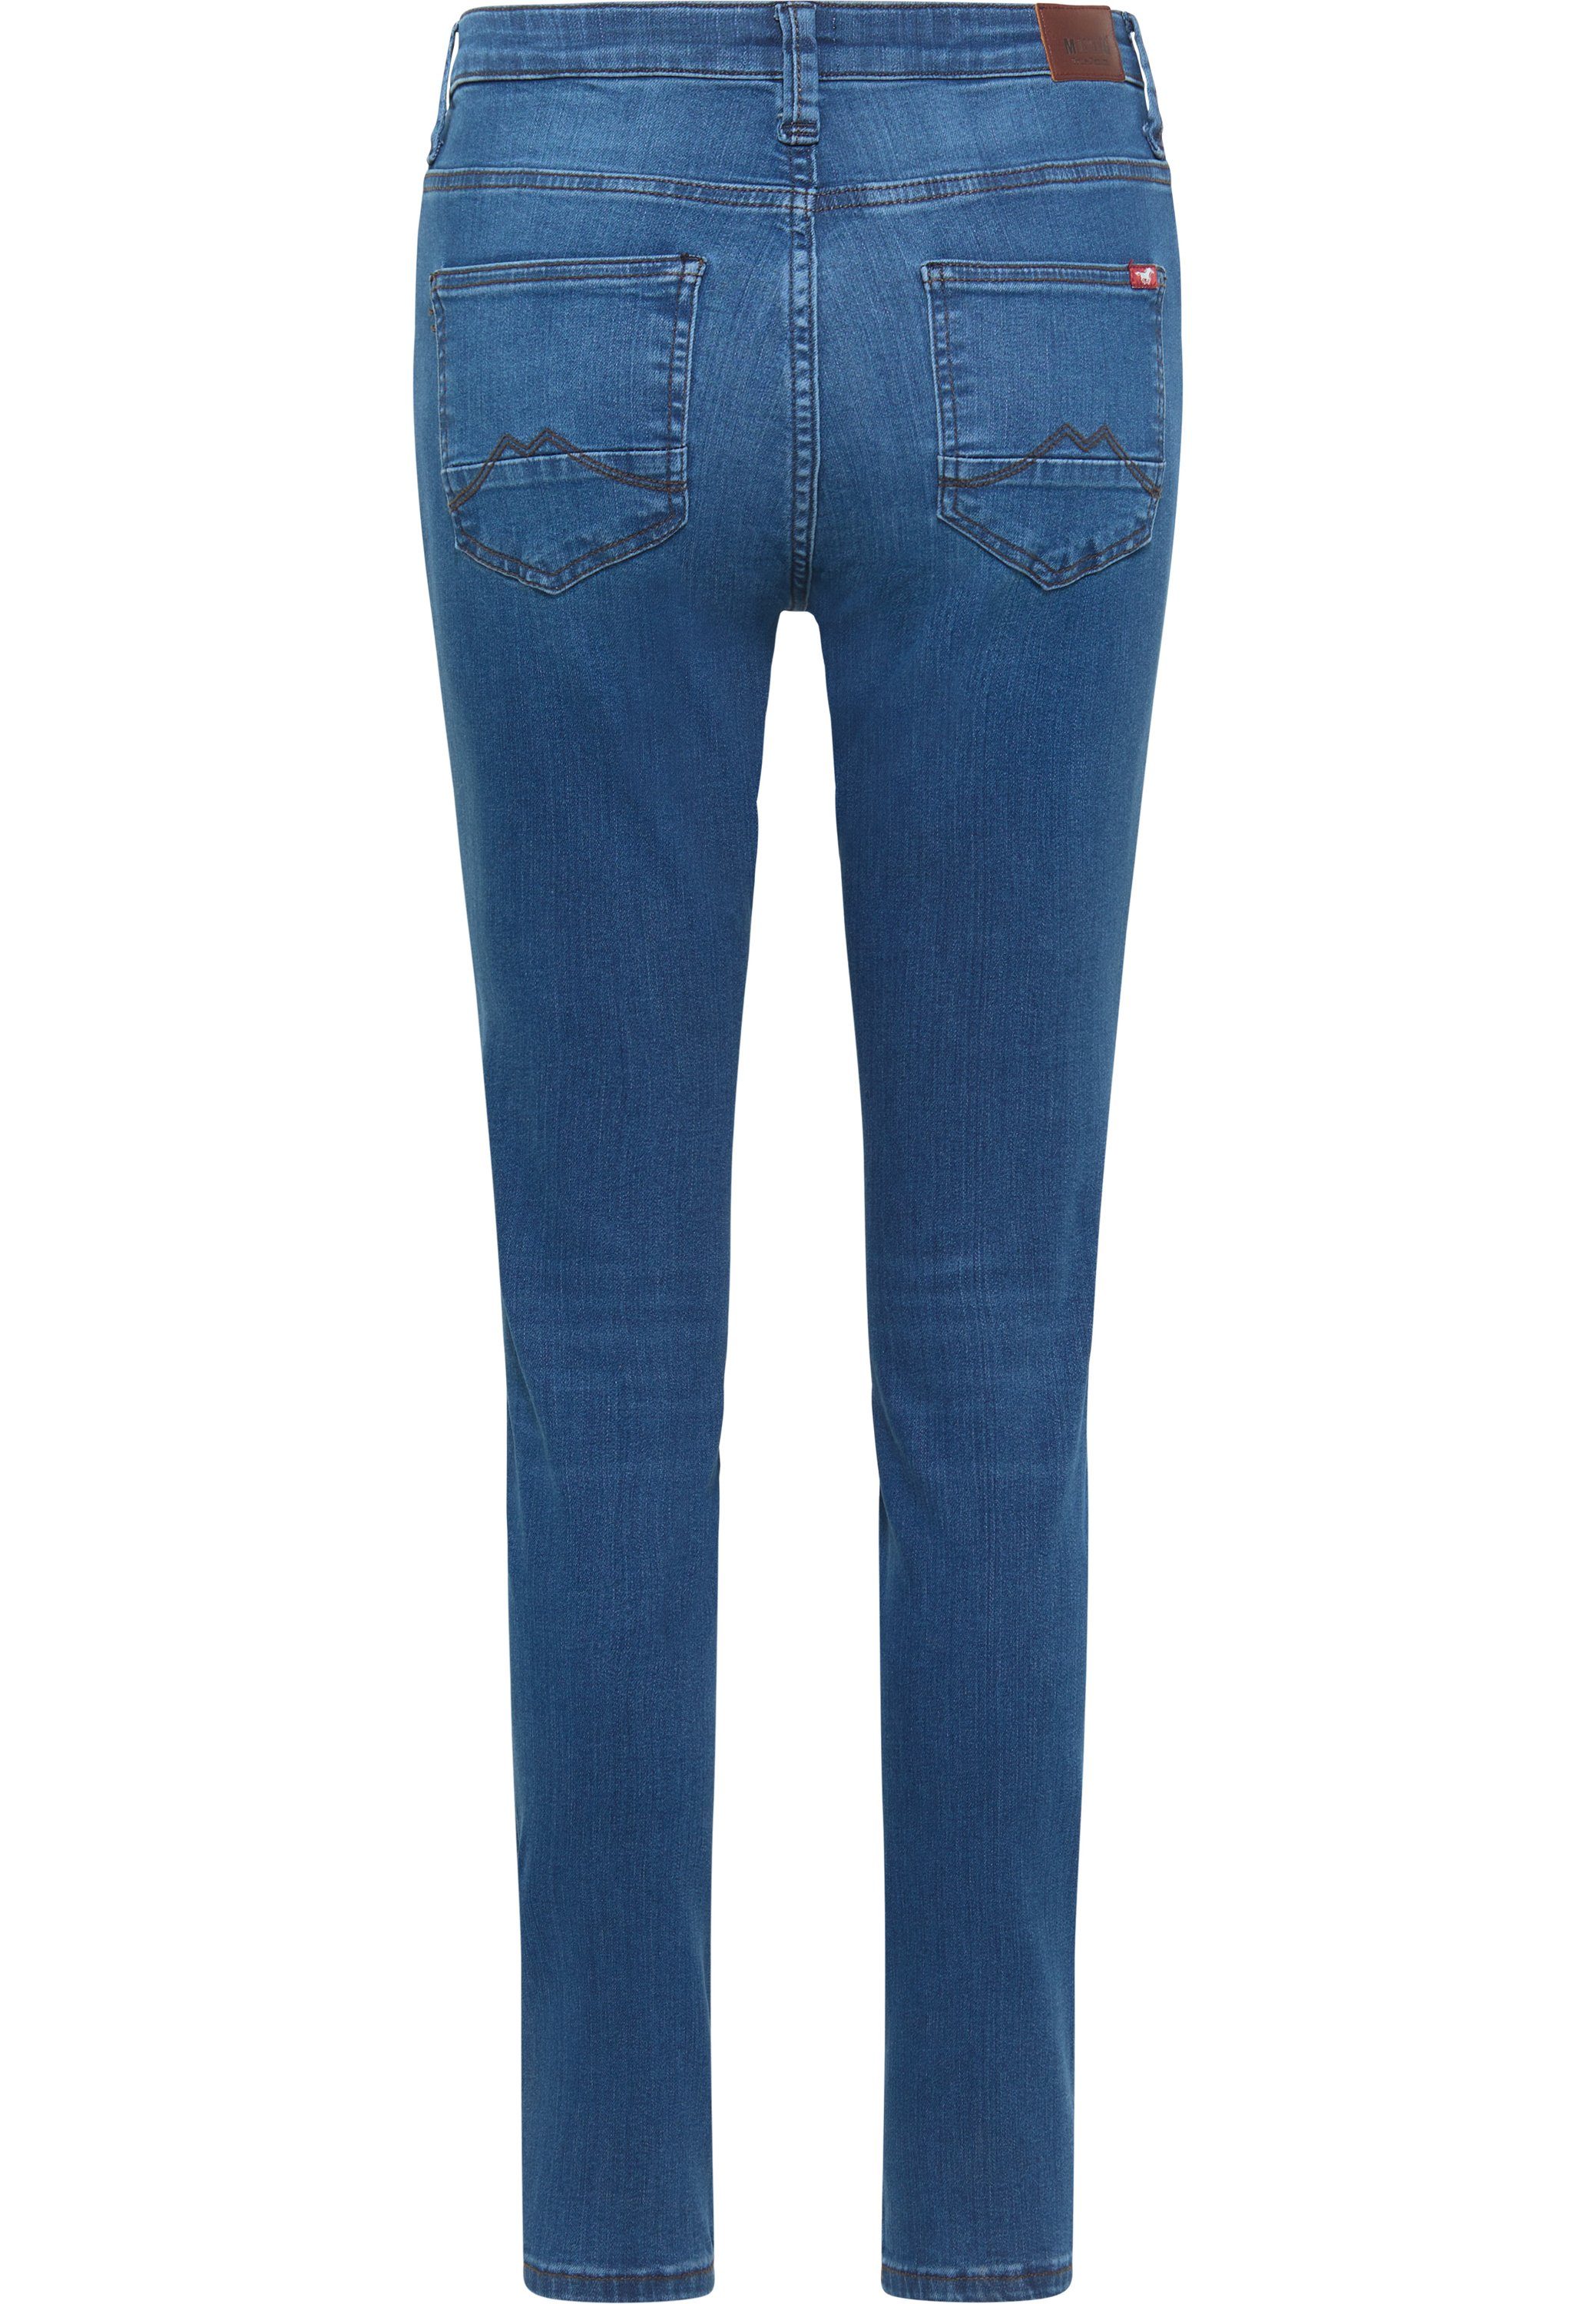 Mustang Skinny fit jeans Mia jeggings